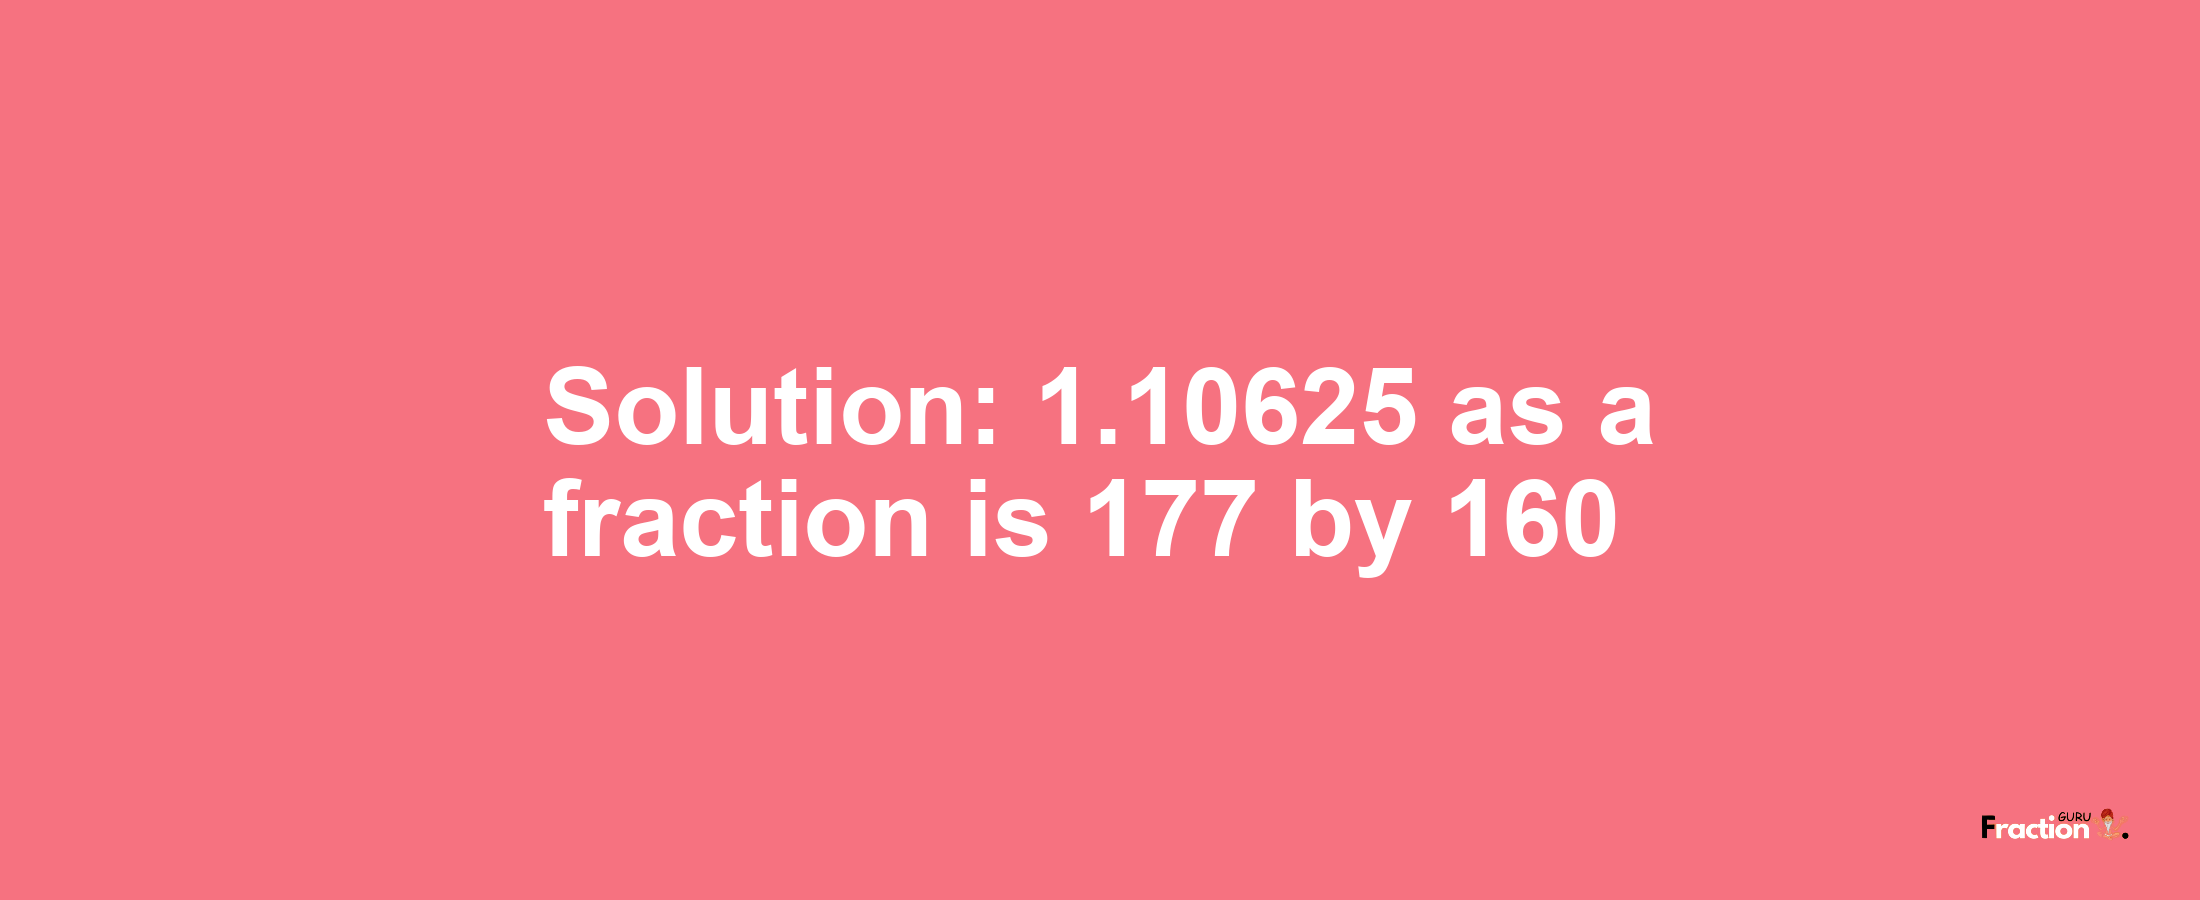 Solution:1.10625 as a fraction is 177/160